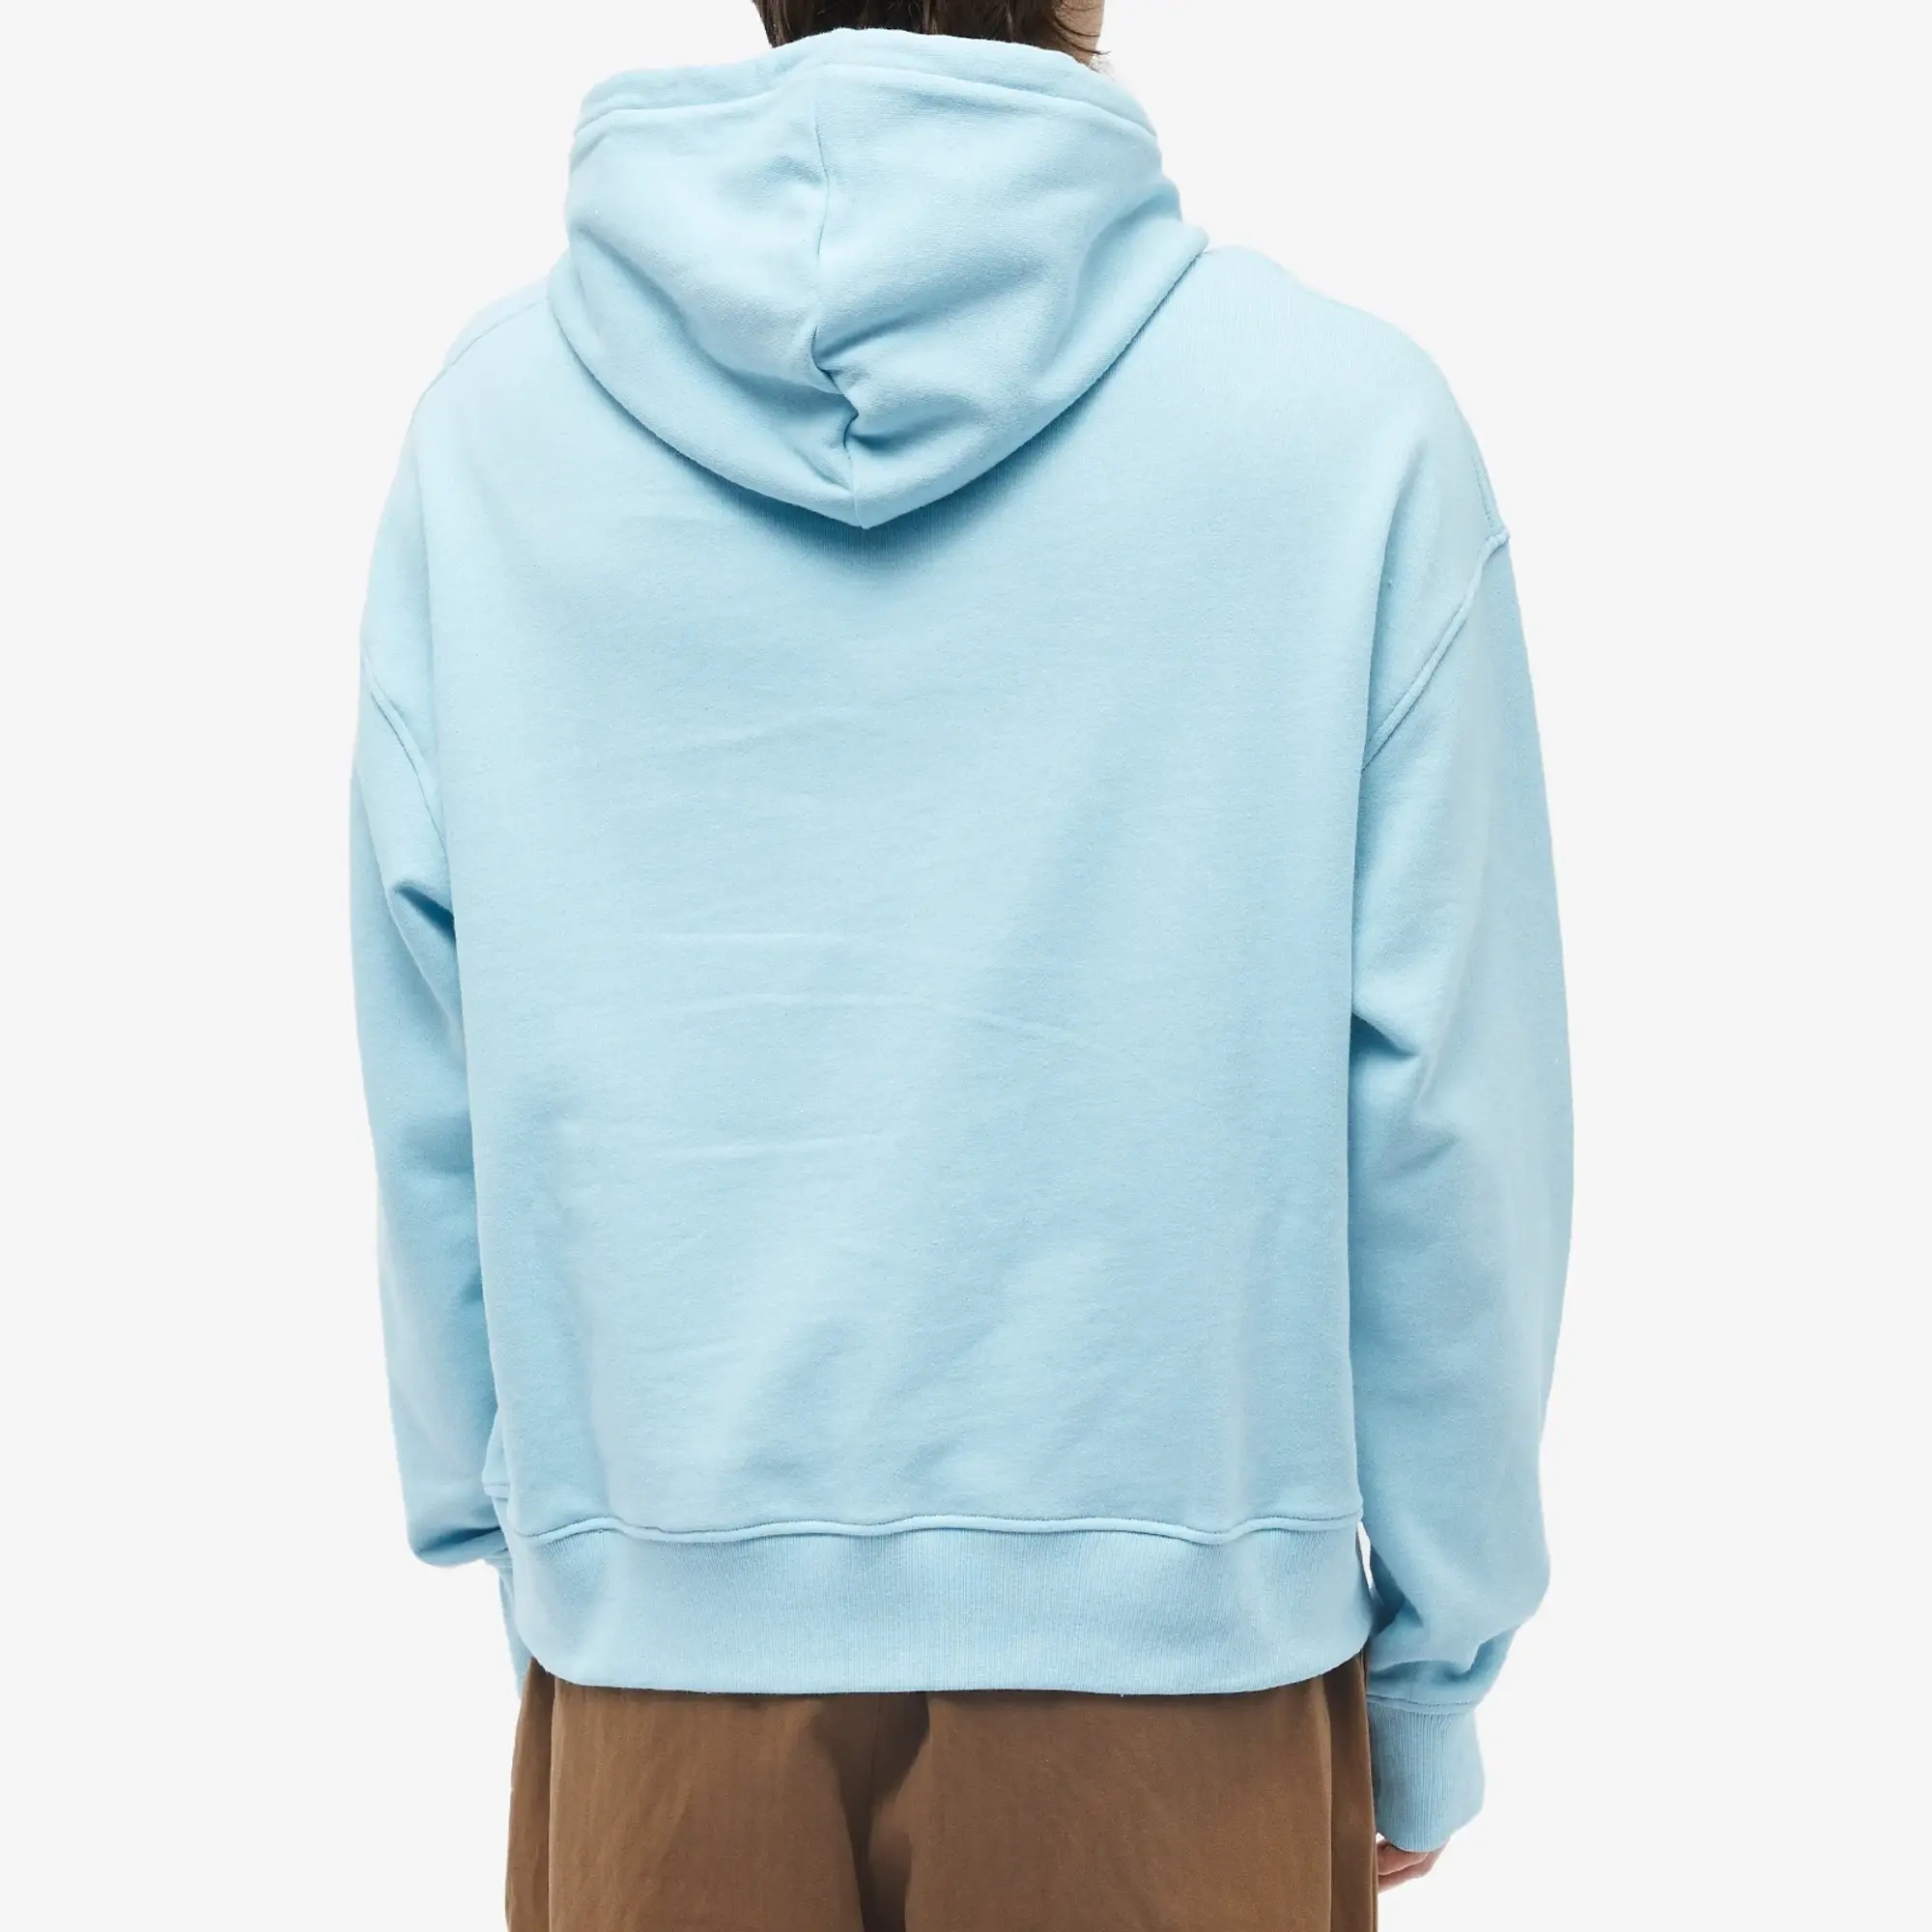 ICECREAM Men's IC Skateboards Embroidered Hoodie Blue